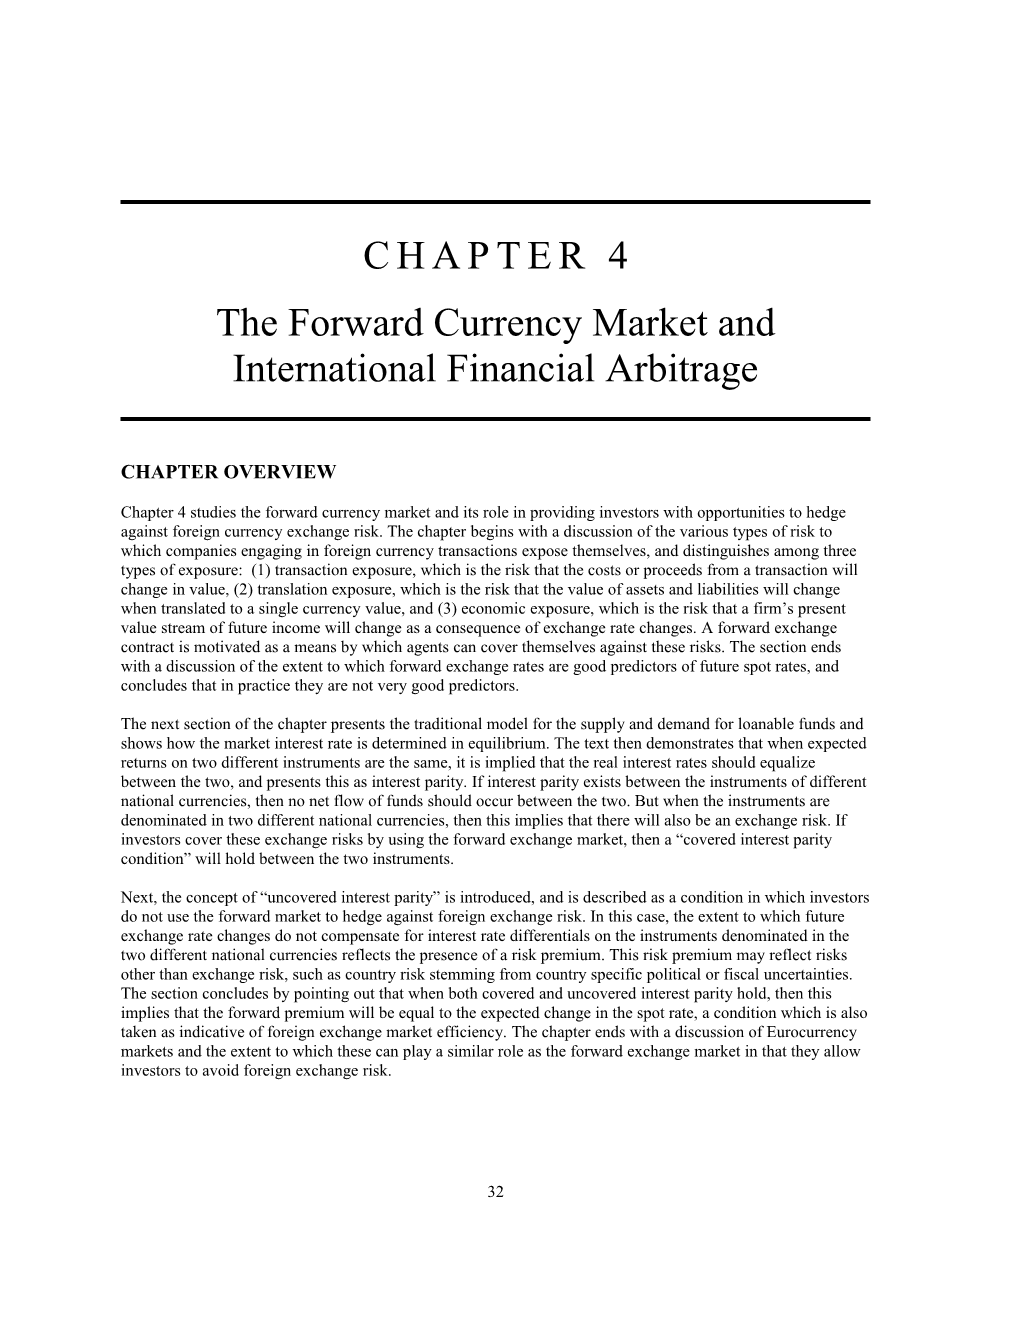 The Forward Currency Market and International Financial Arbitrage